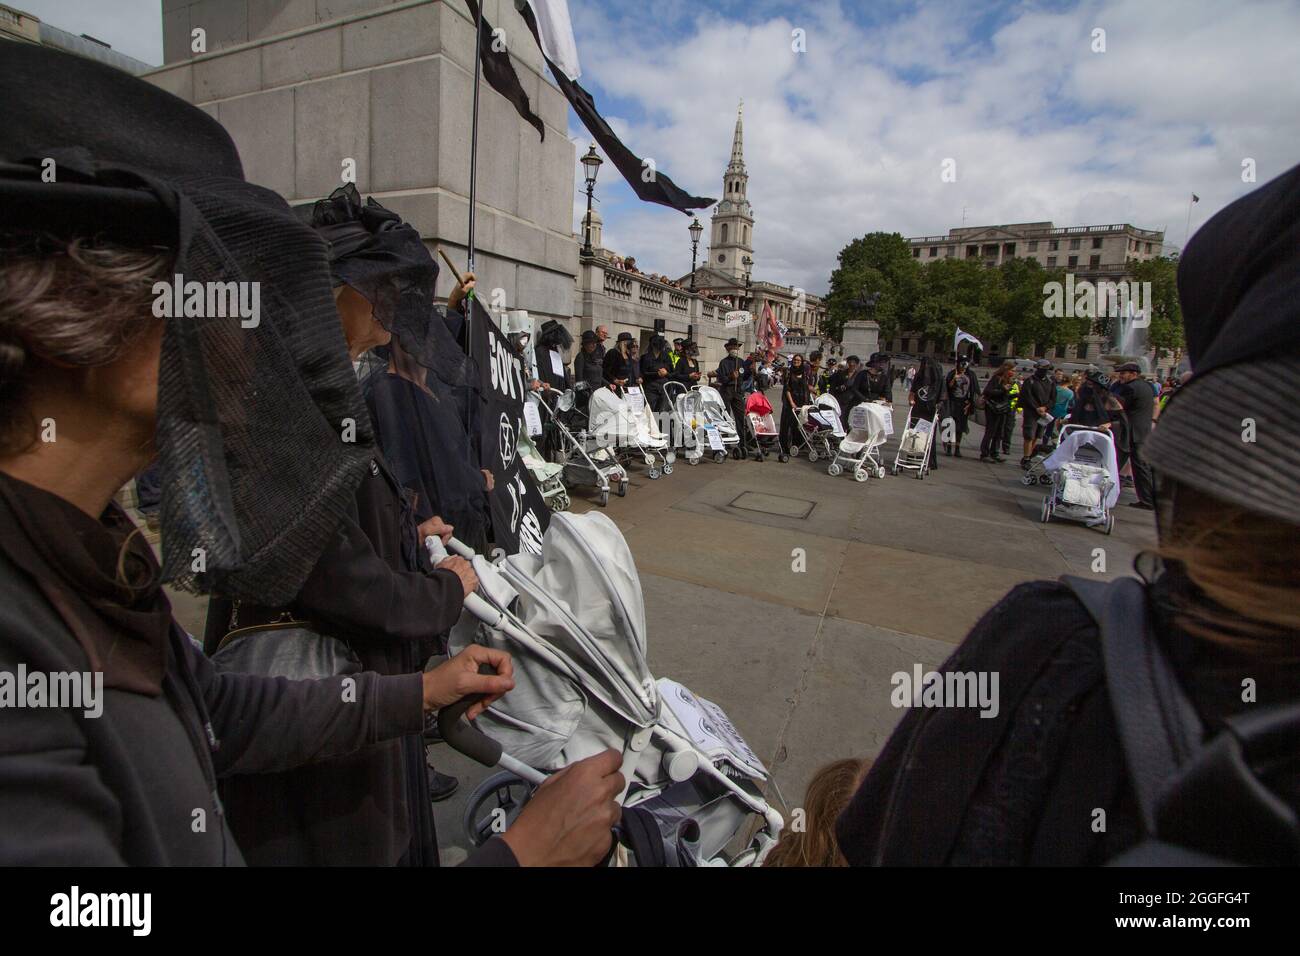 Extinction Rebellion activists London 31 August 2021. Pram action protesters in Central London, walk with ghostly white prams dressed in funeral attire Stock Photo